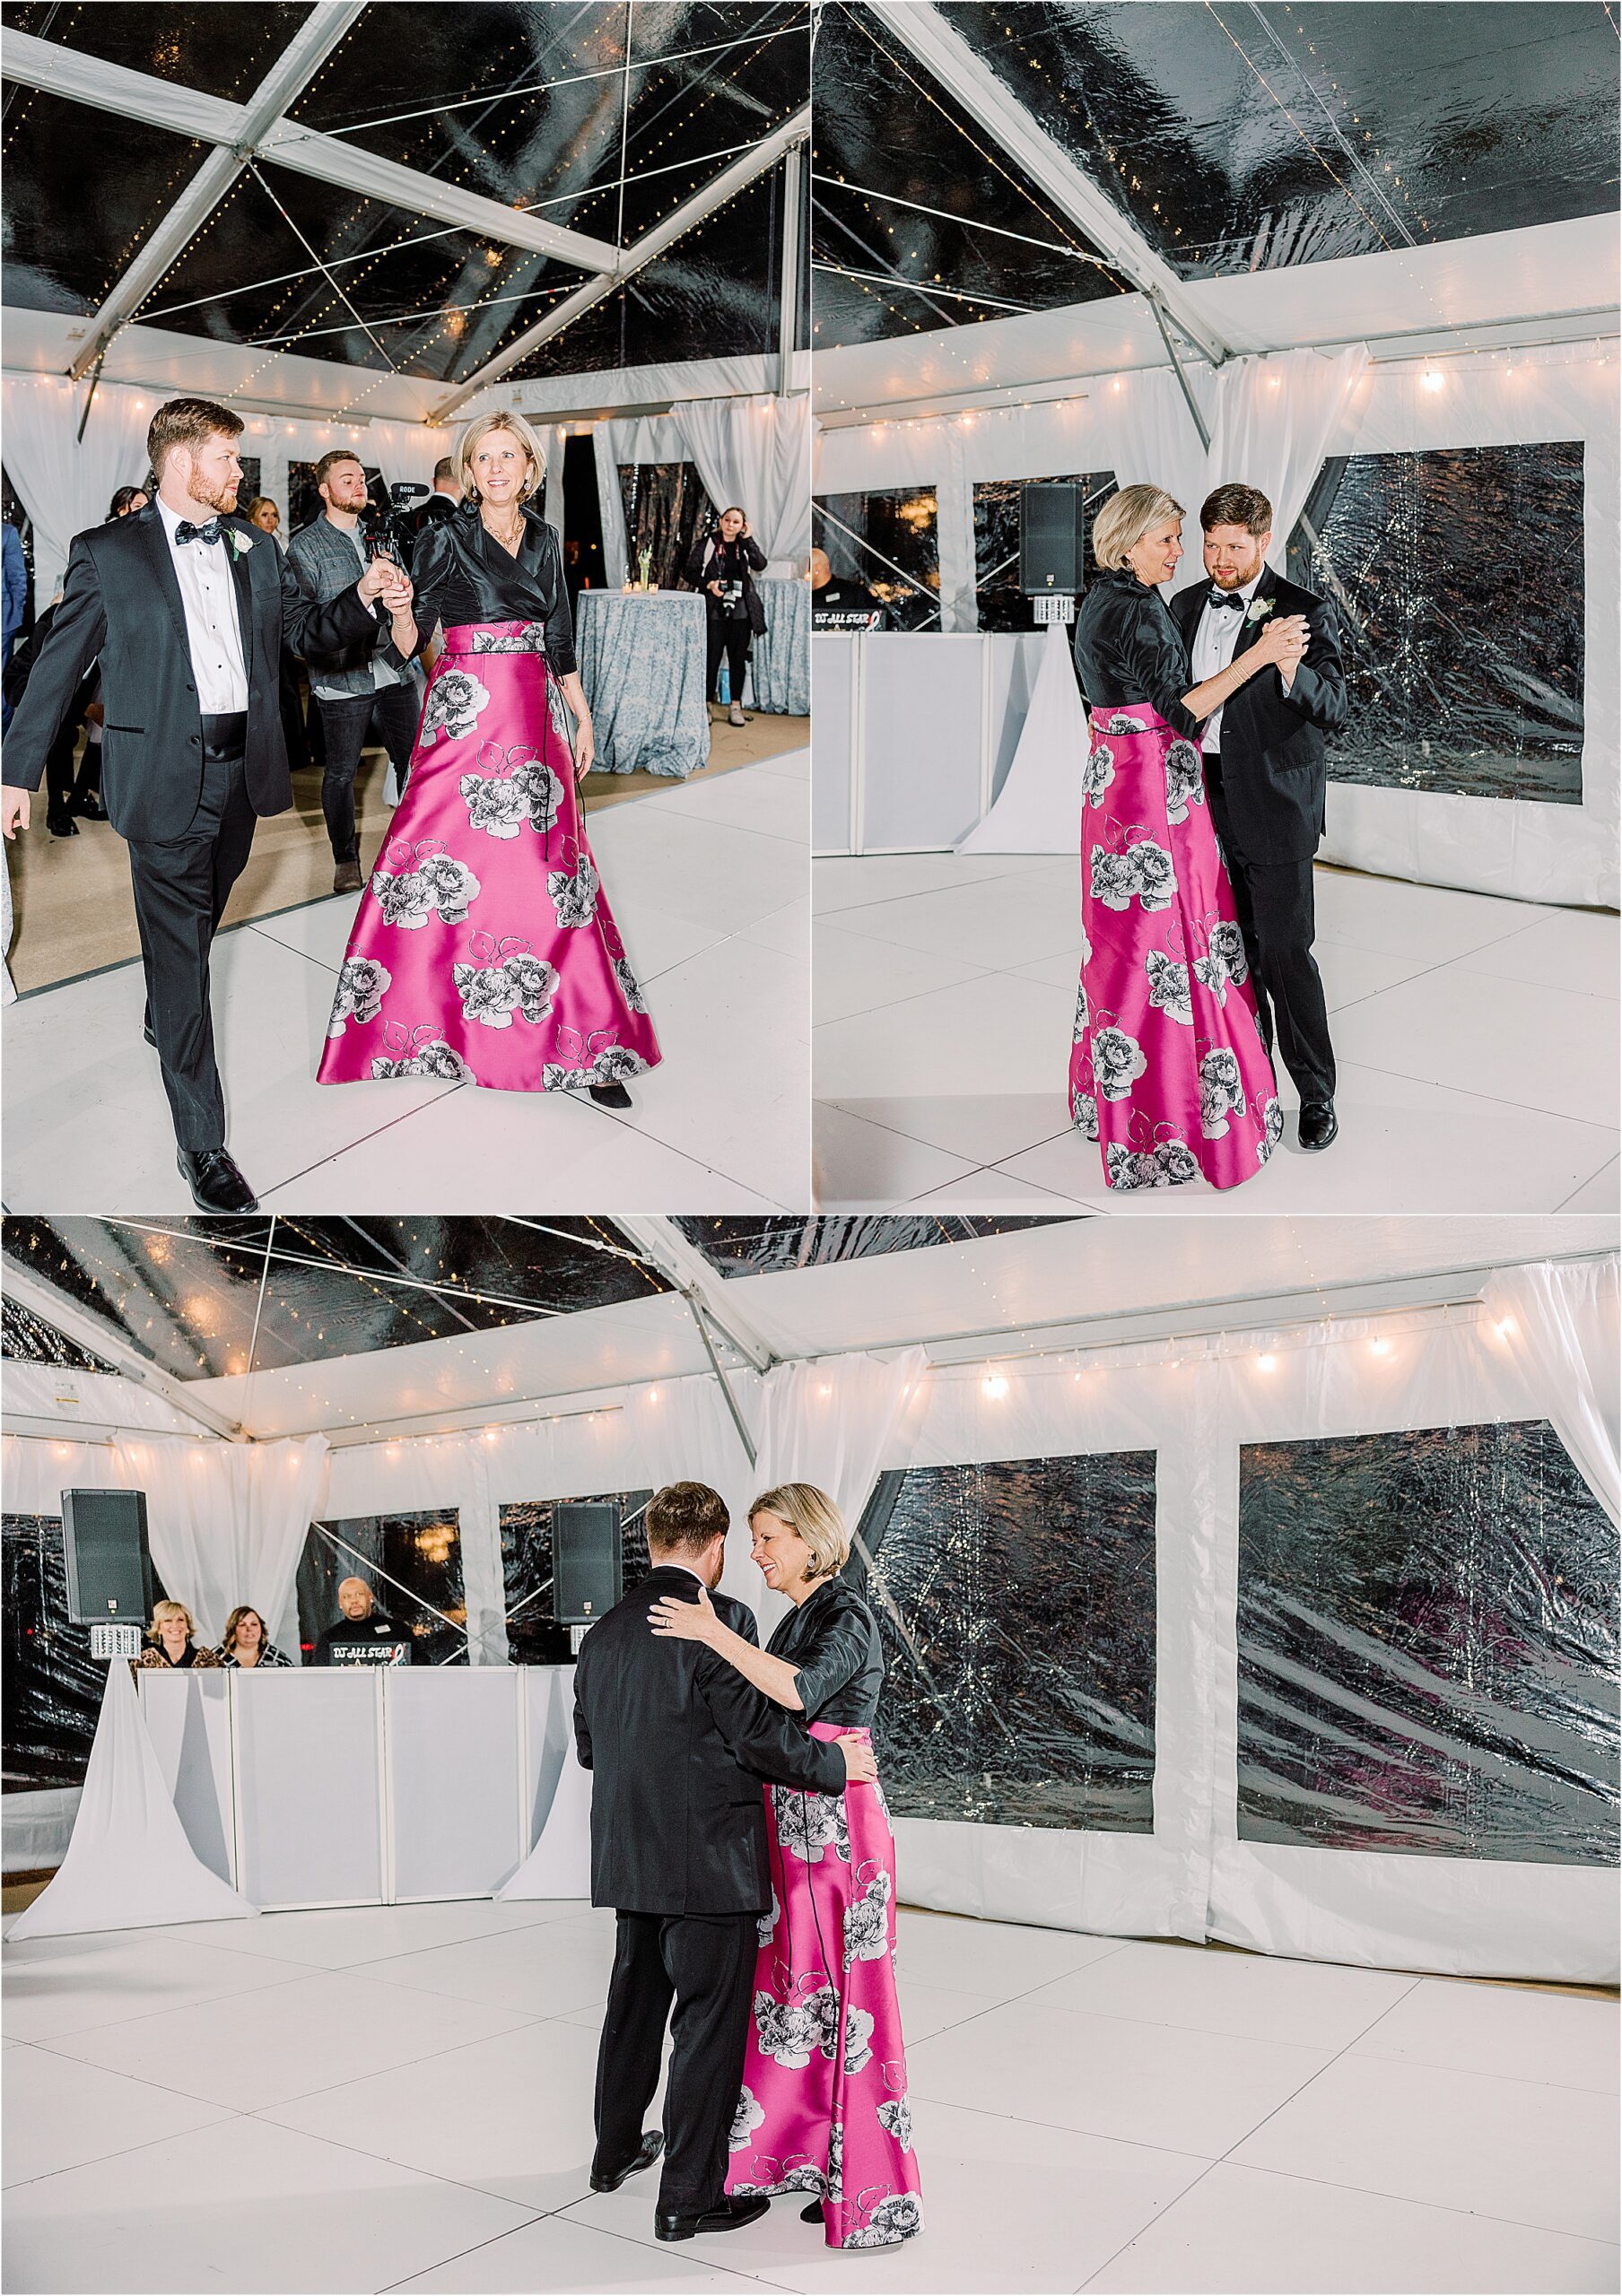 Mother in pink dress dancing with son in black tuxedo 